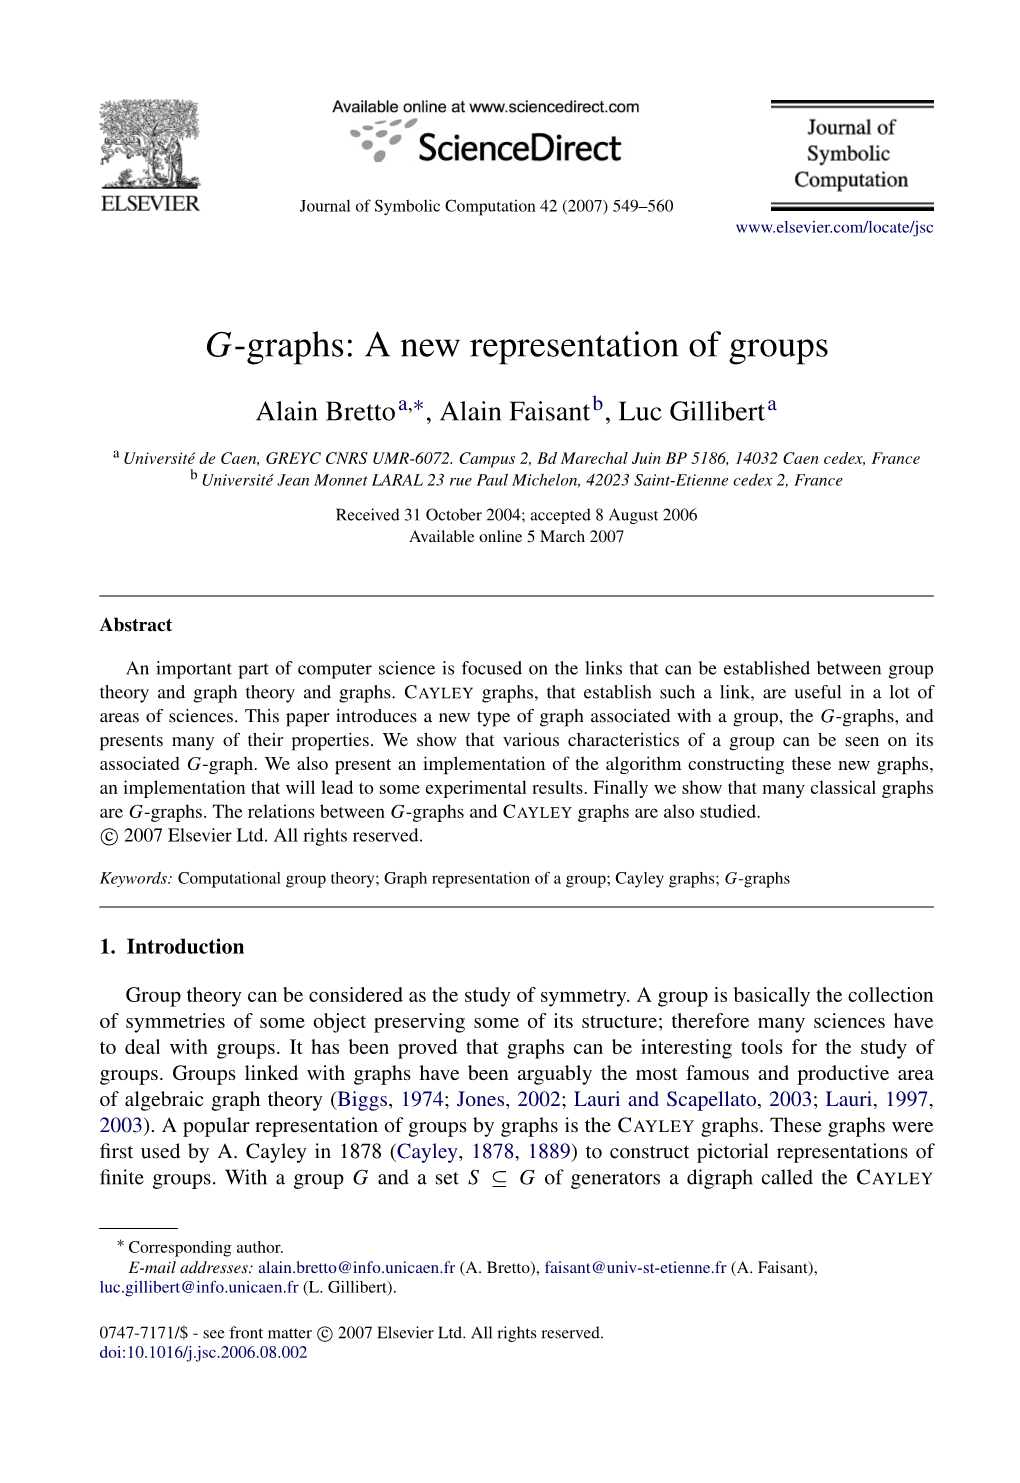 G-Graphs: a New Representation of Groups